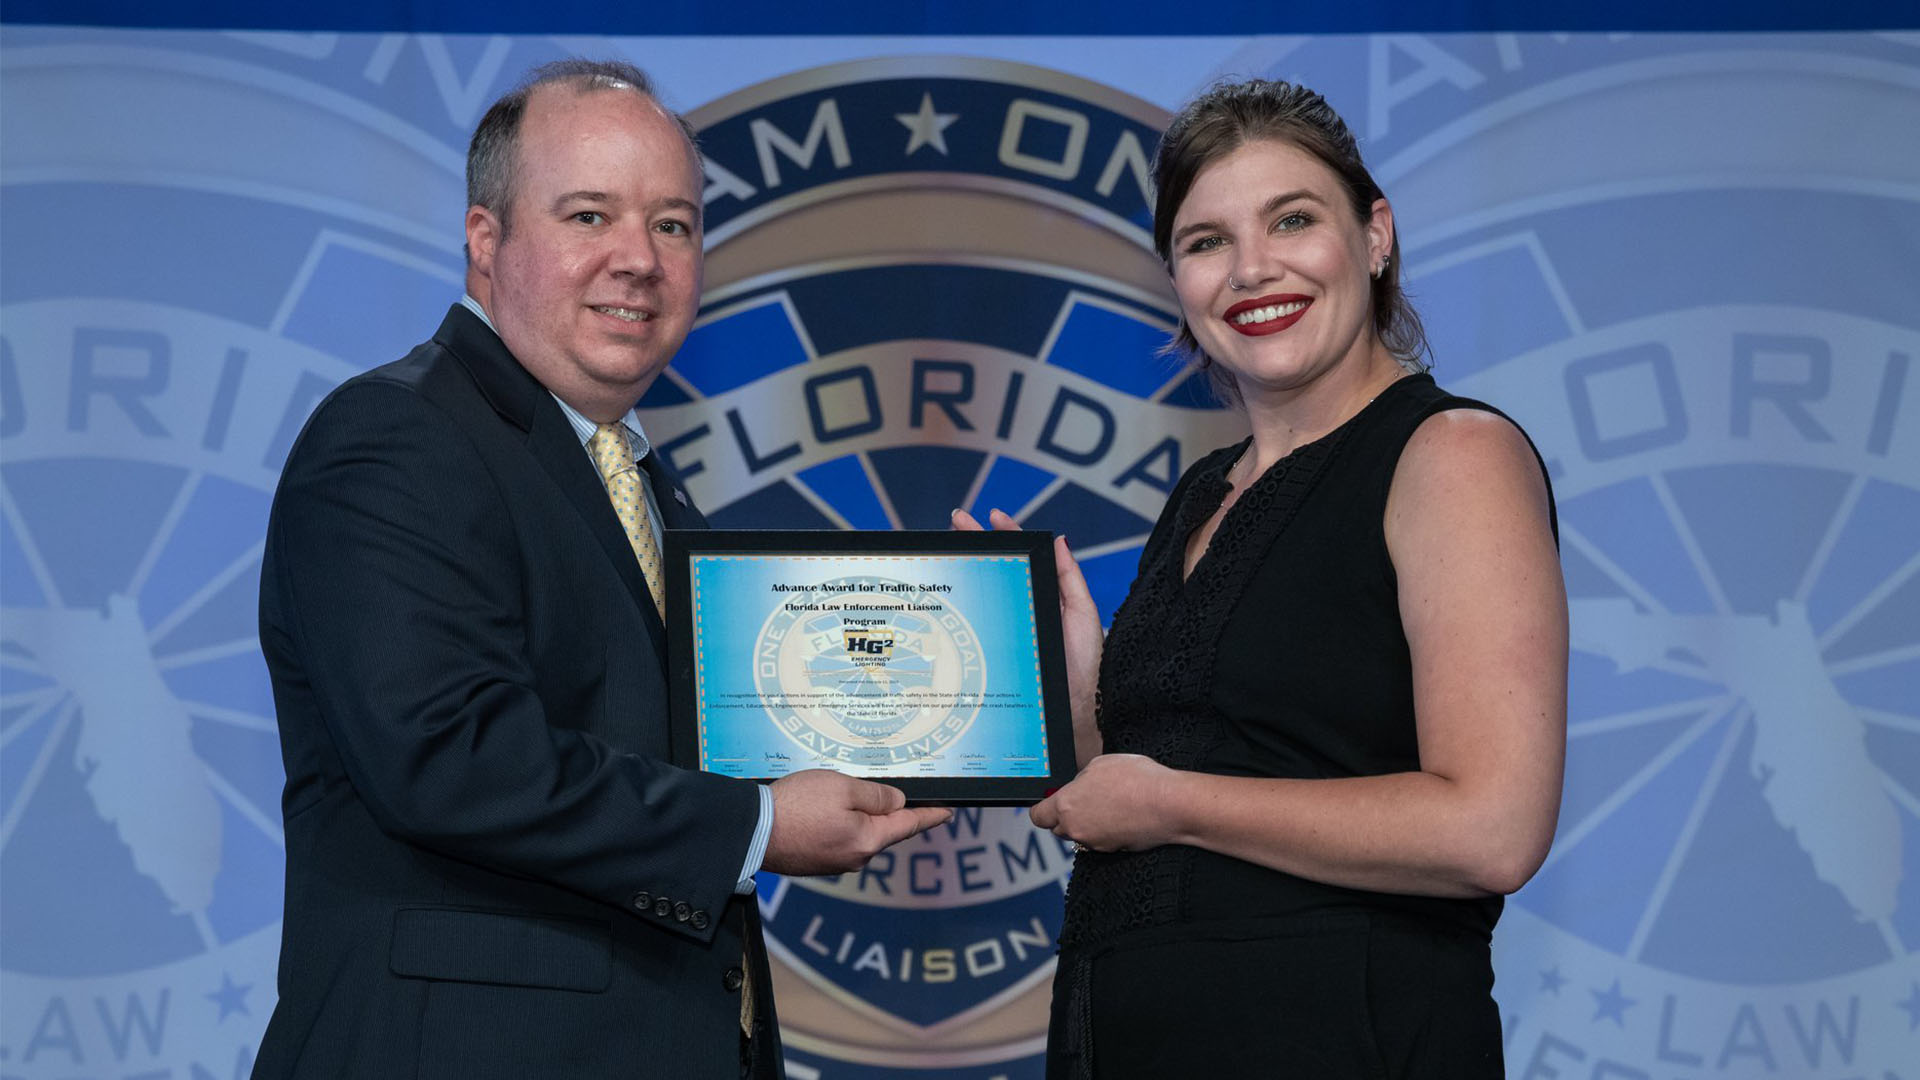 HG2 emergency lighting at the Florida Law Enforcement Liaison Award Ceremony 2019